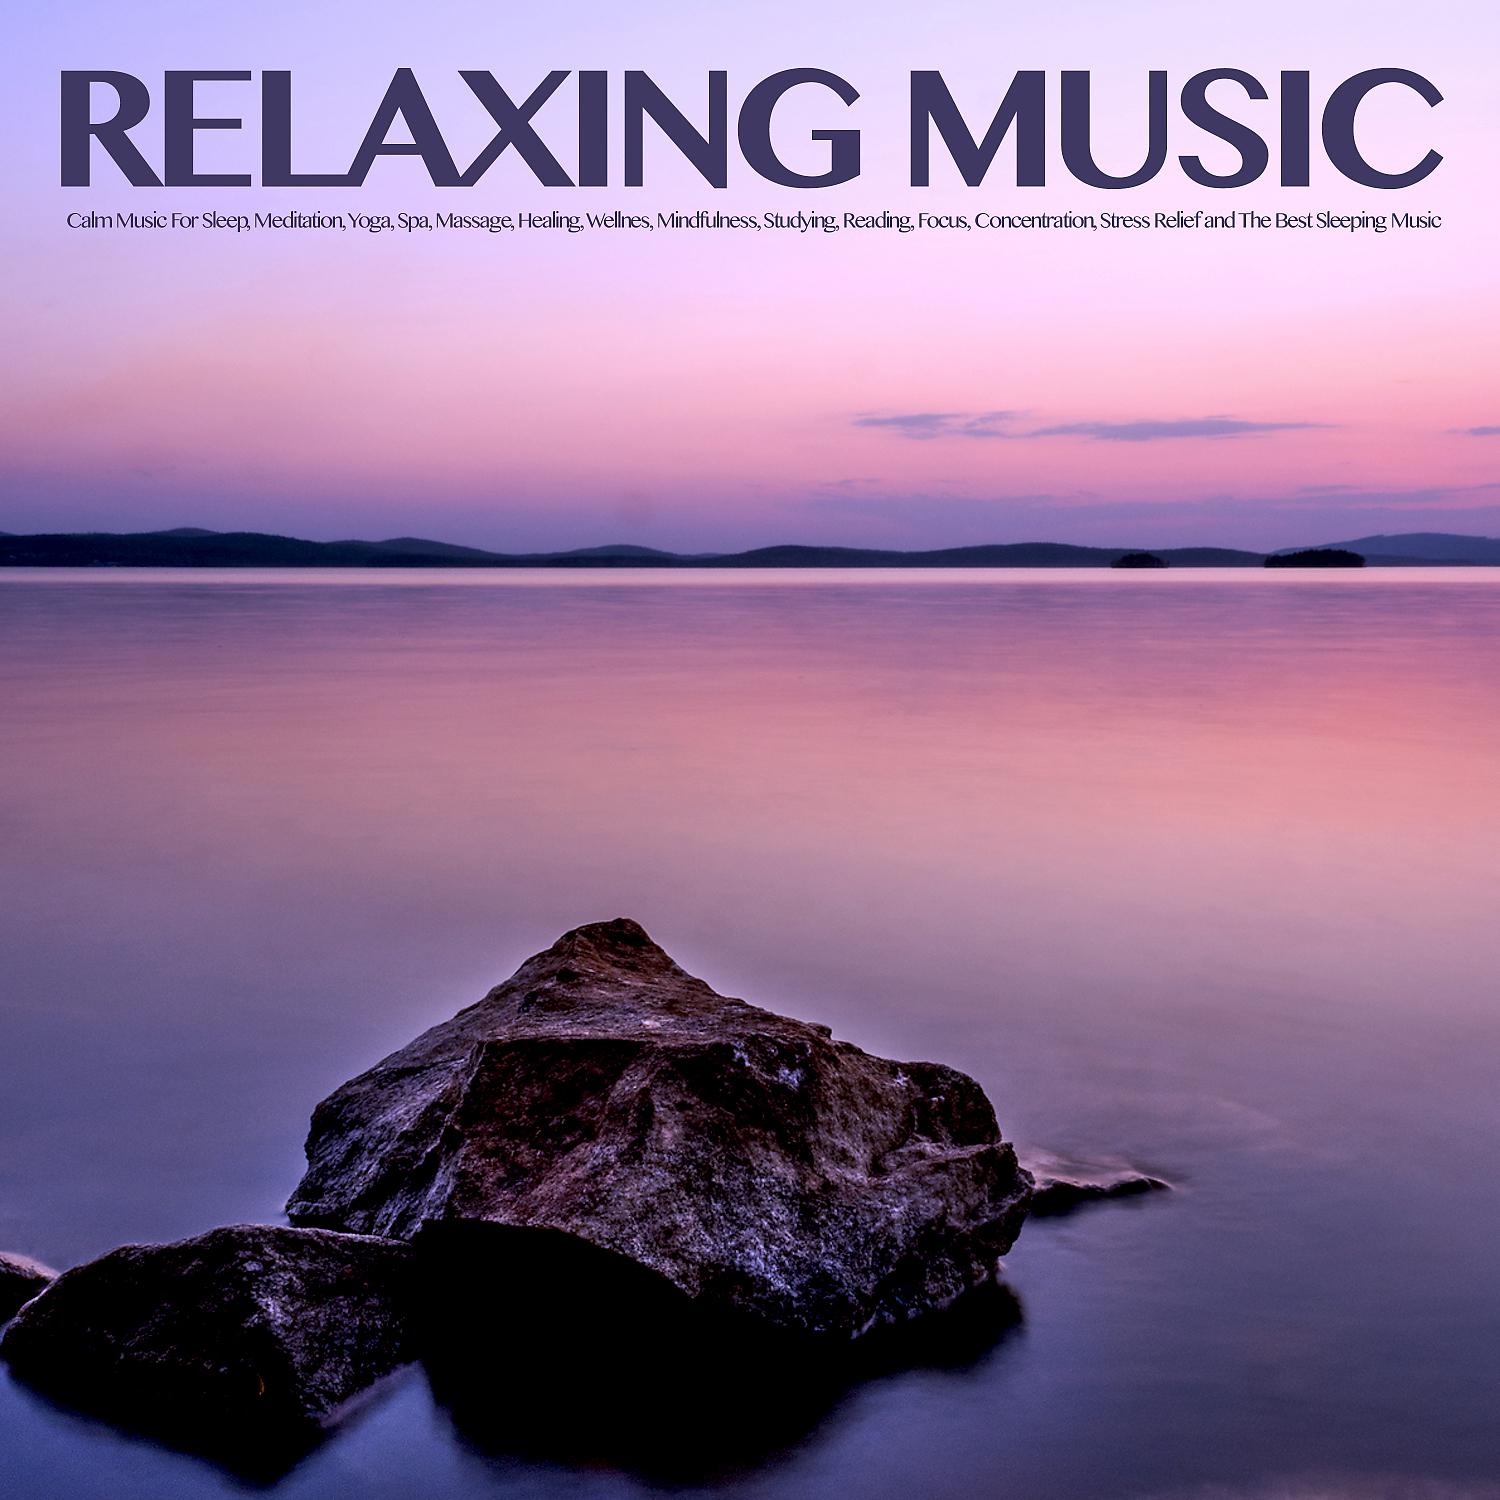 Постер альбома Relaxing Music: Calm Music For Sleep, Meditation, Yoga, Spa, Massage, Healing, Wellnes, Mindfulness, Studying, Reading, Focus, Concentration, Stress Relief and The Best Sleeping Music